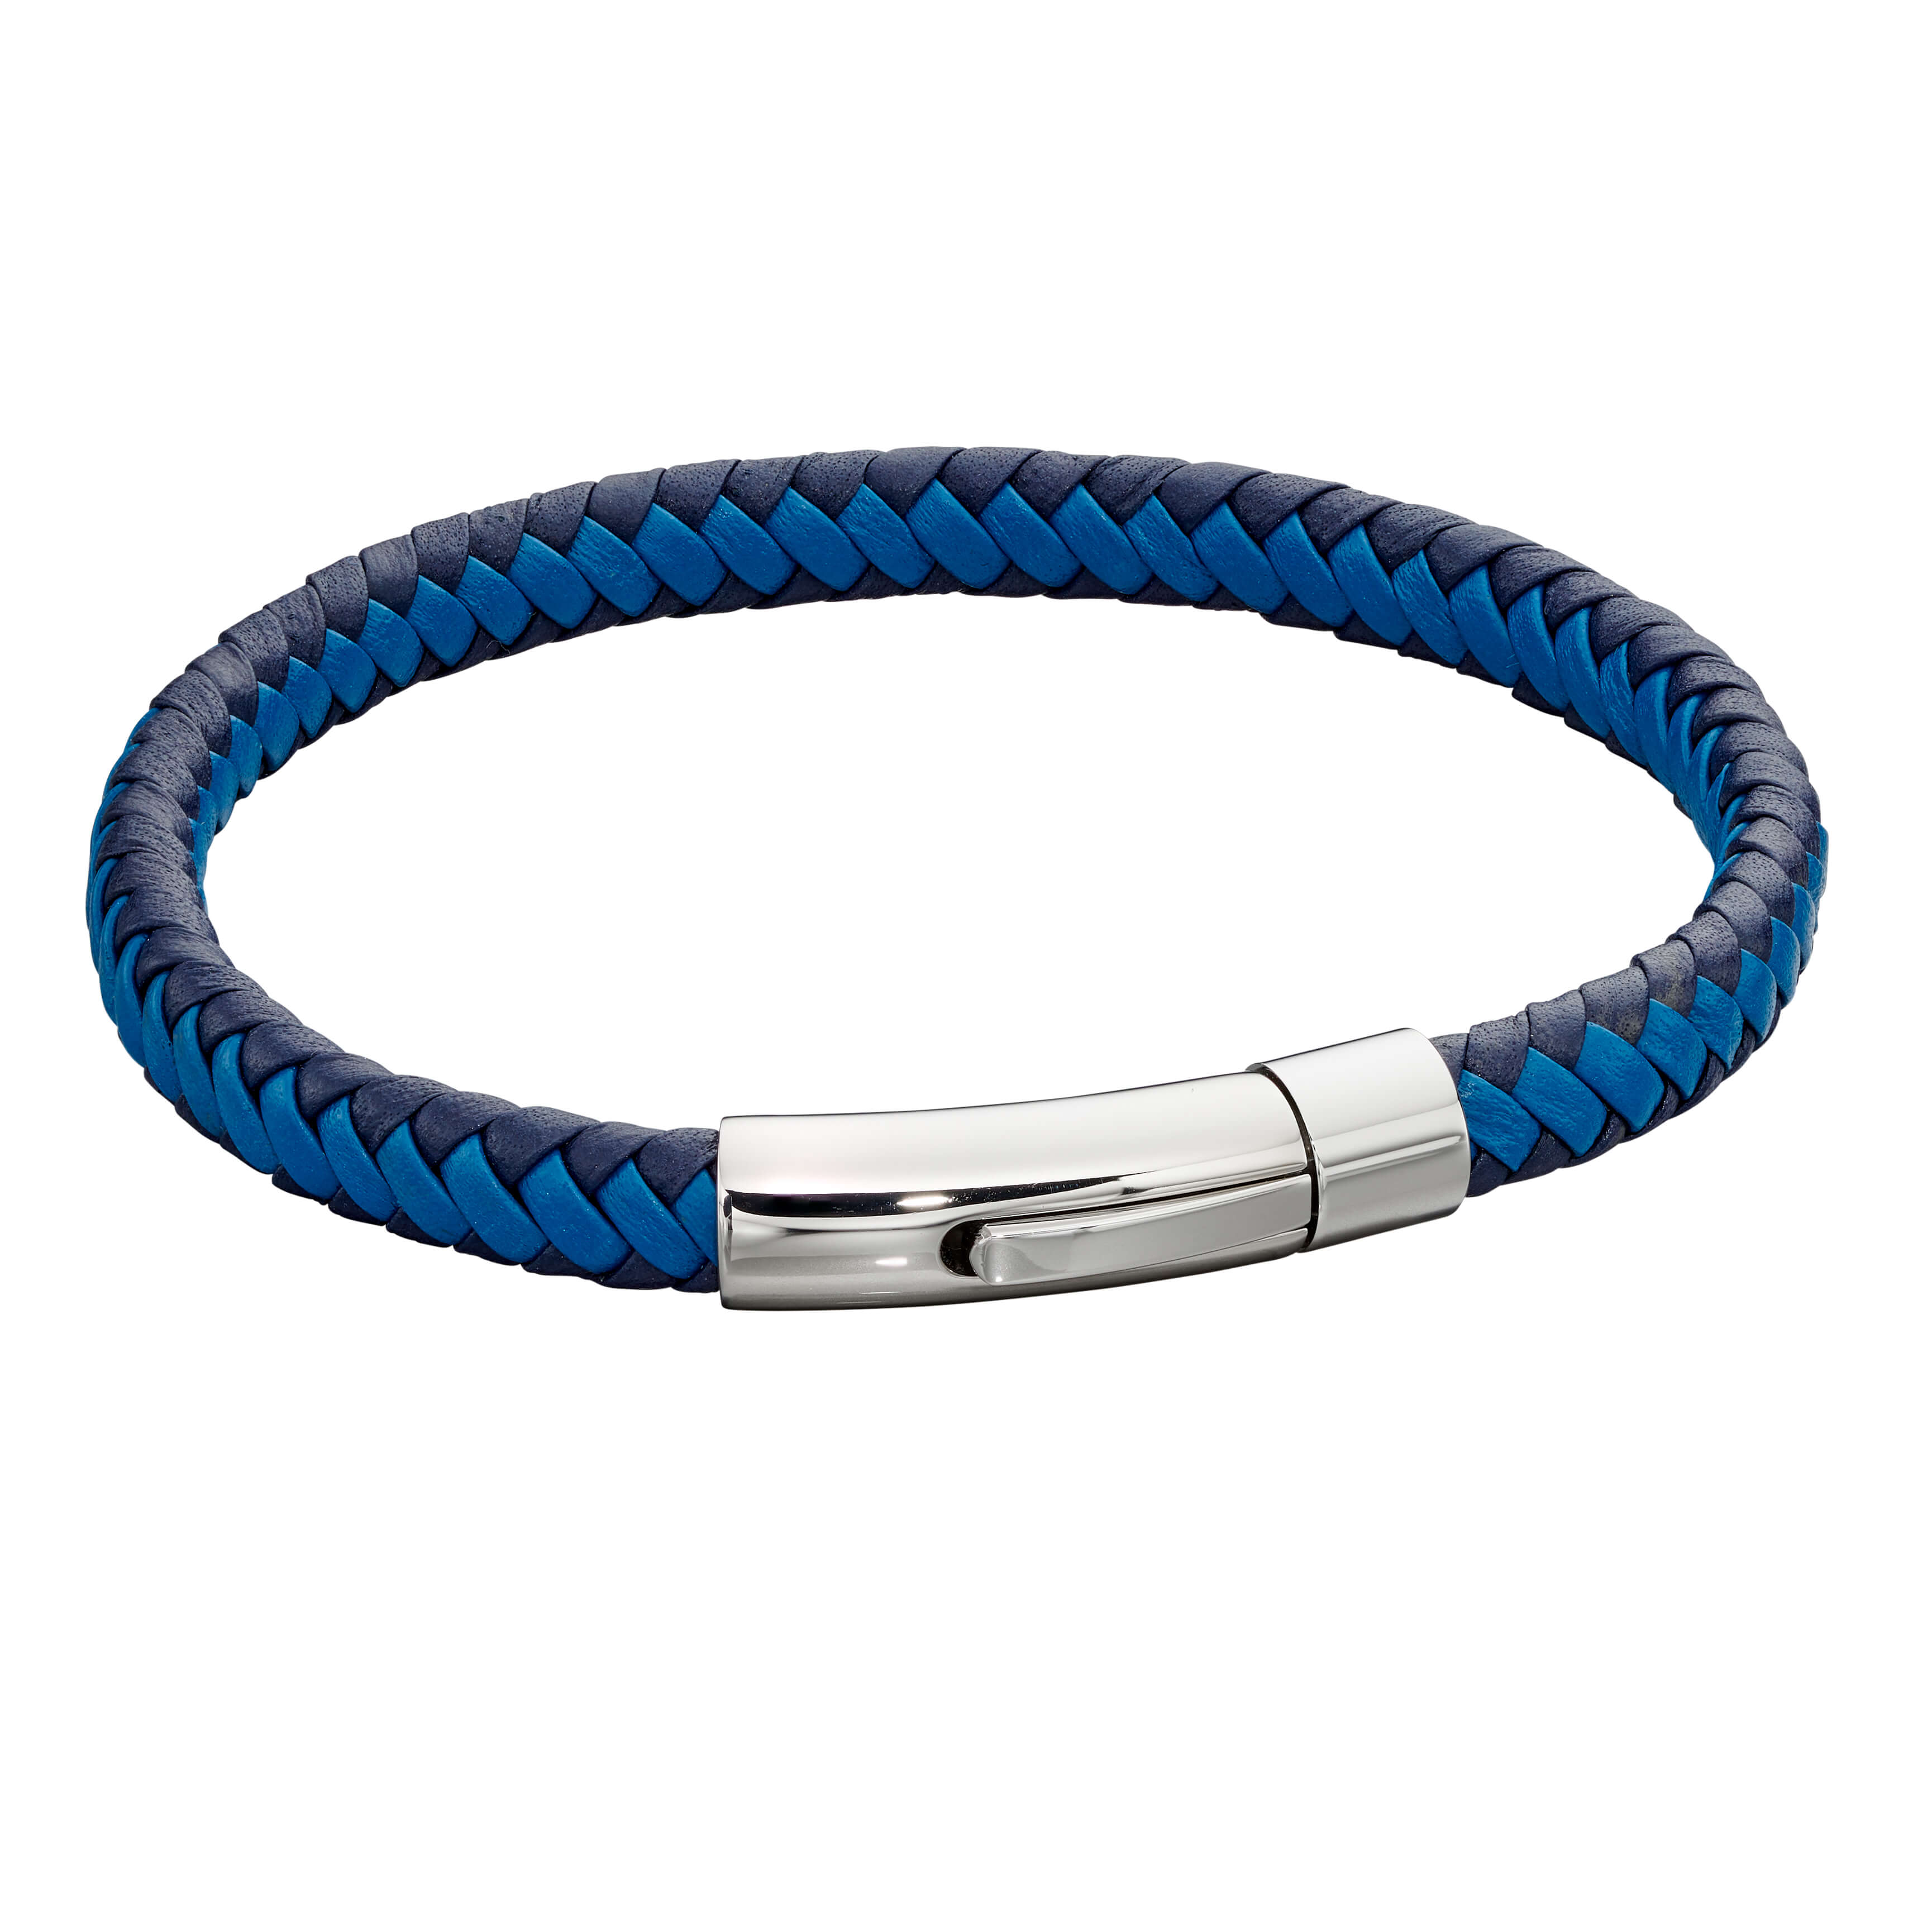 Stainless Steel & Blue Woven Leather Bracelet - FB0013 - Hallmark Jewellers Formby & The Jewellers Bench Widnes